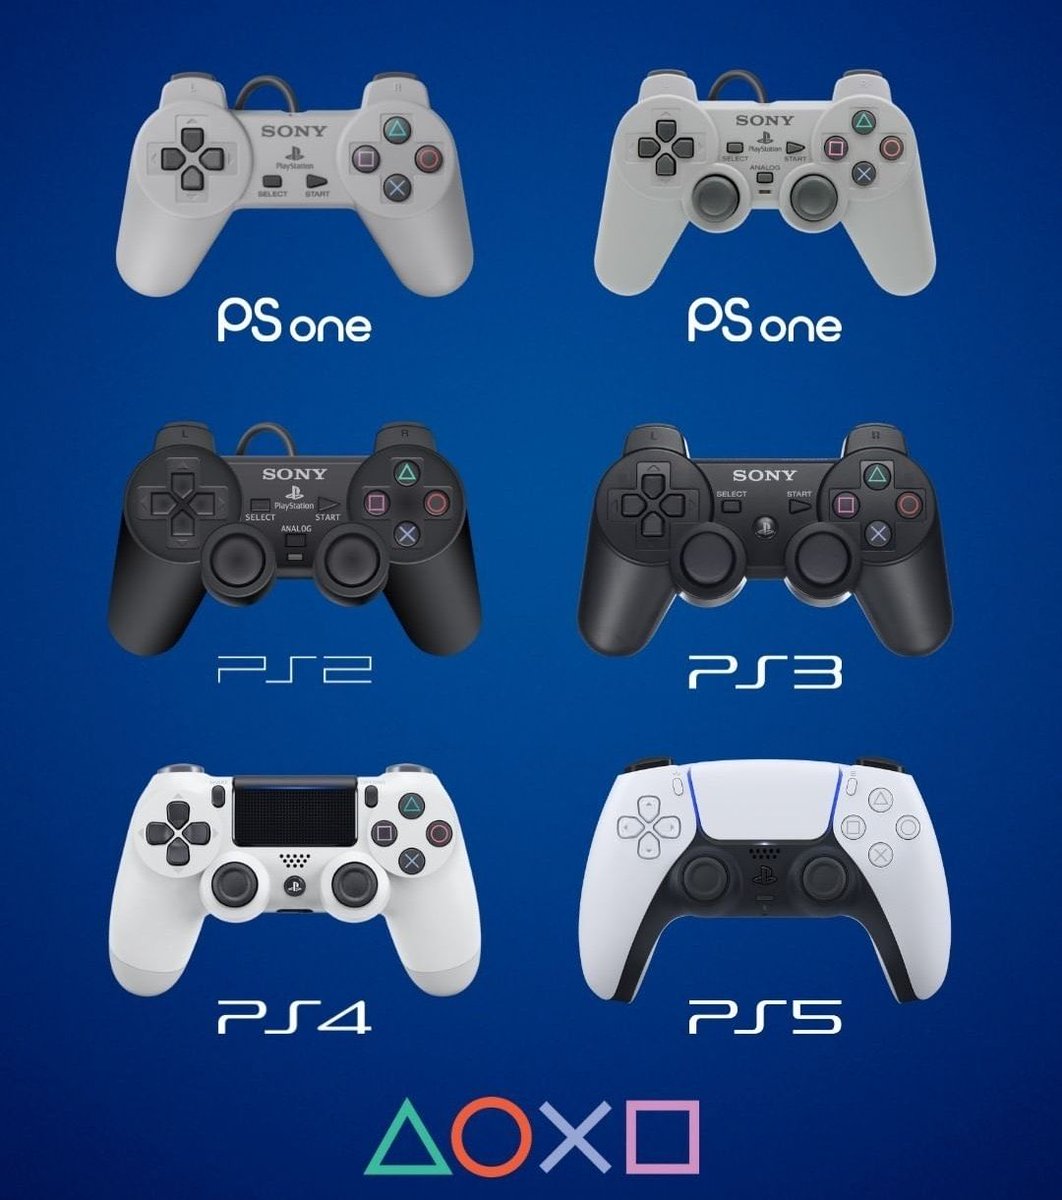 Your first Playstation controller? https://t.co/VI3wwyYeCO